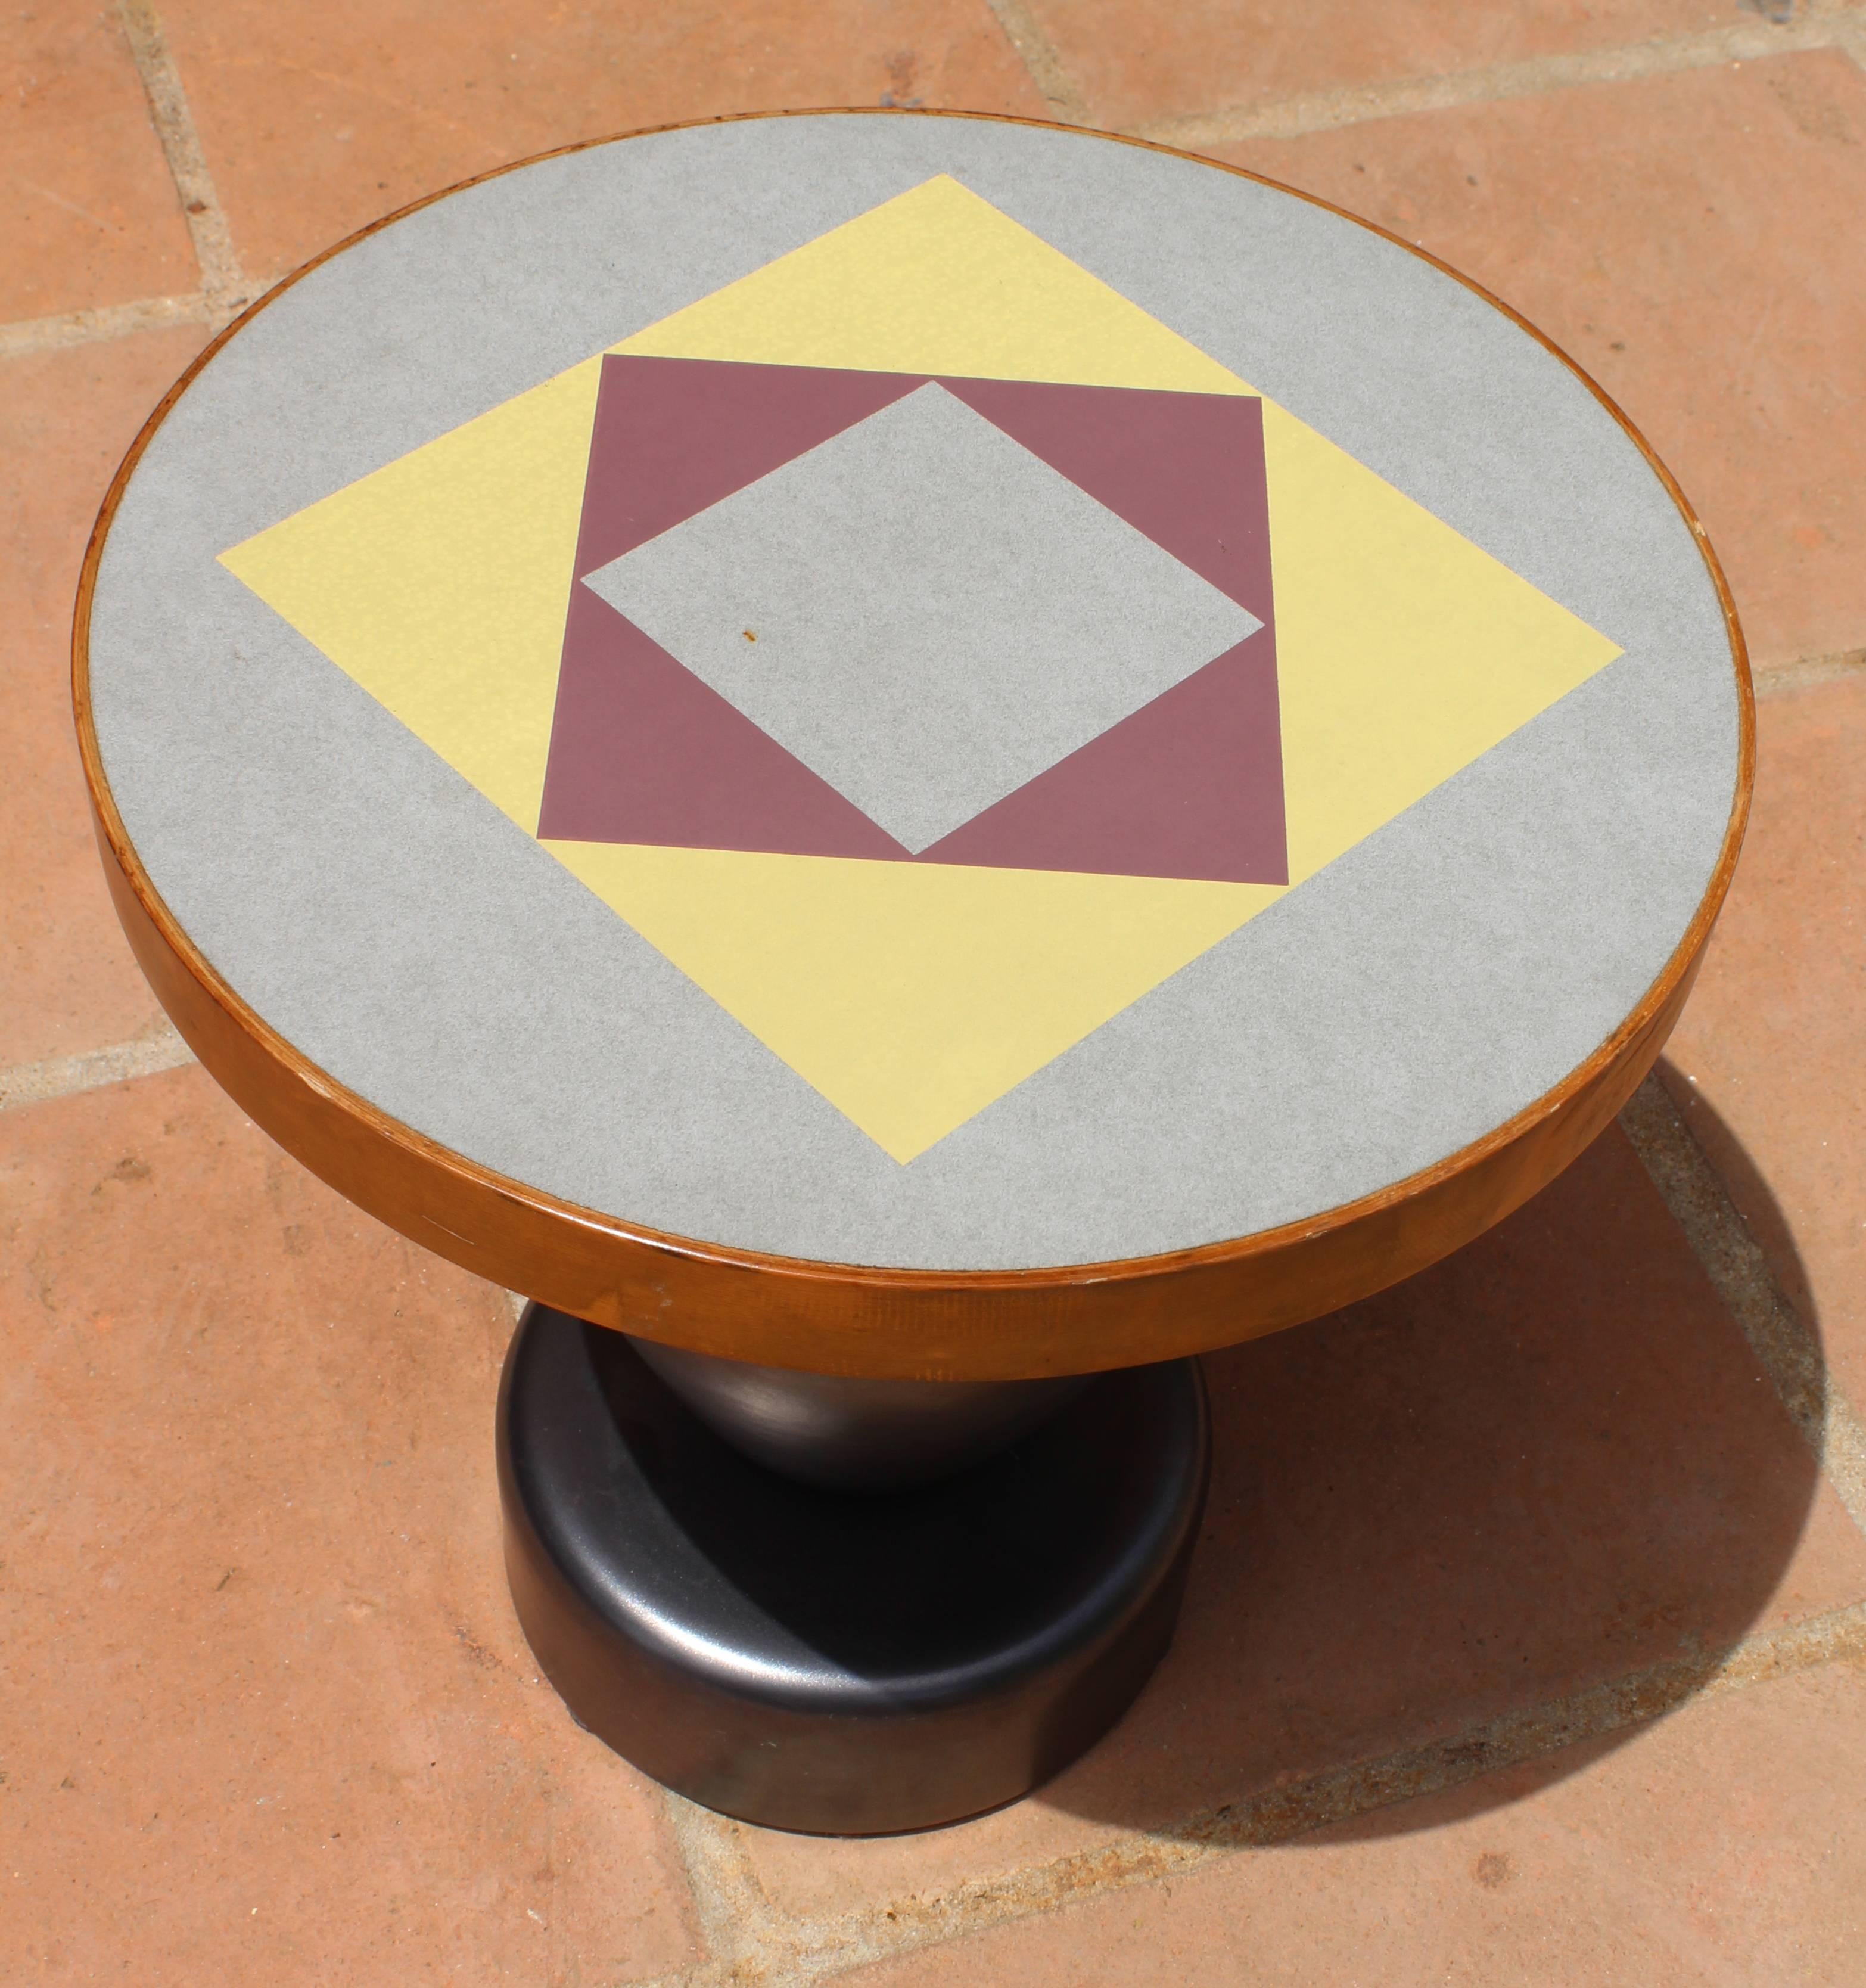 Post-Modern Coffee Table by Sottsass for Zanotta 1990 in Polychrome Laminated Wood, Ceramic